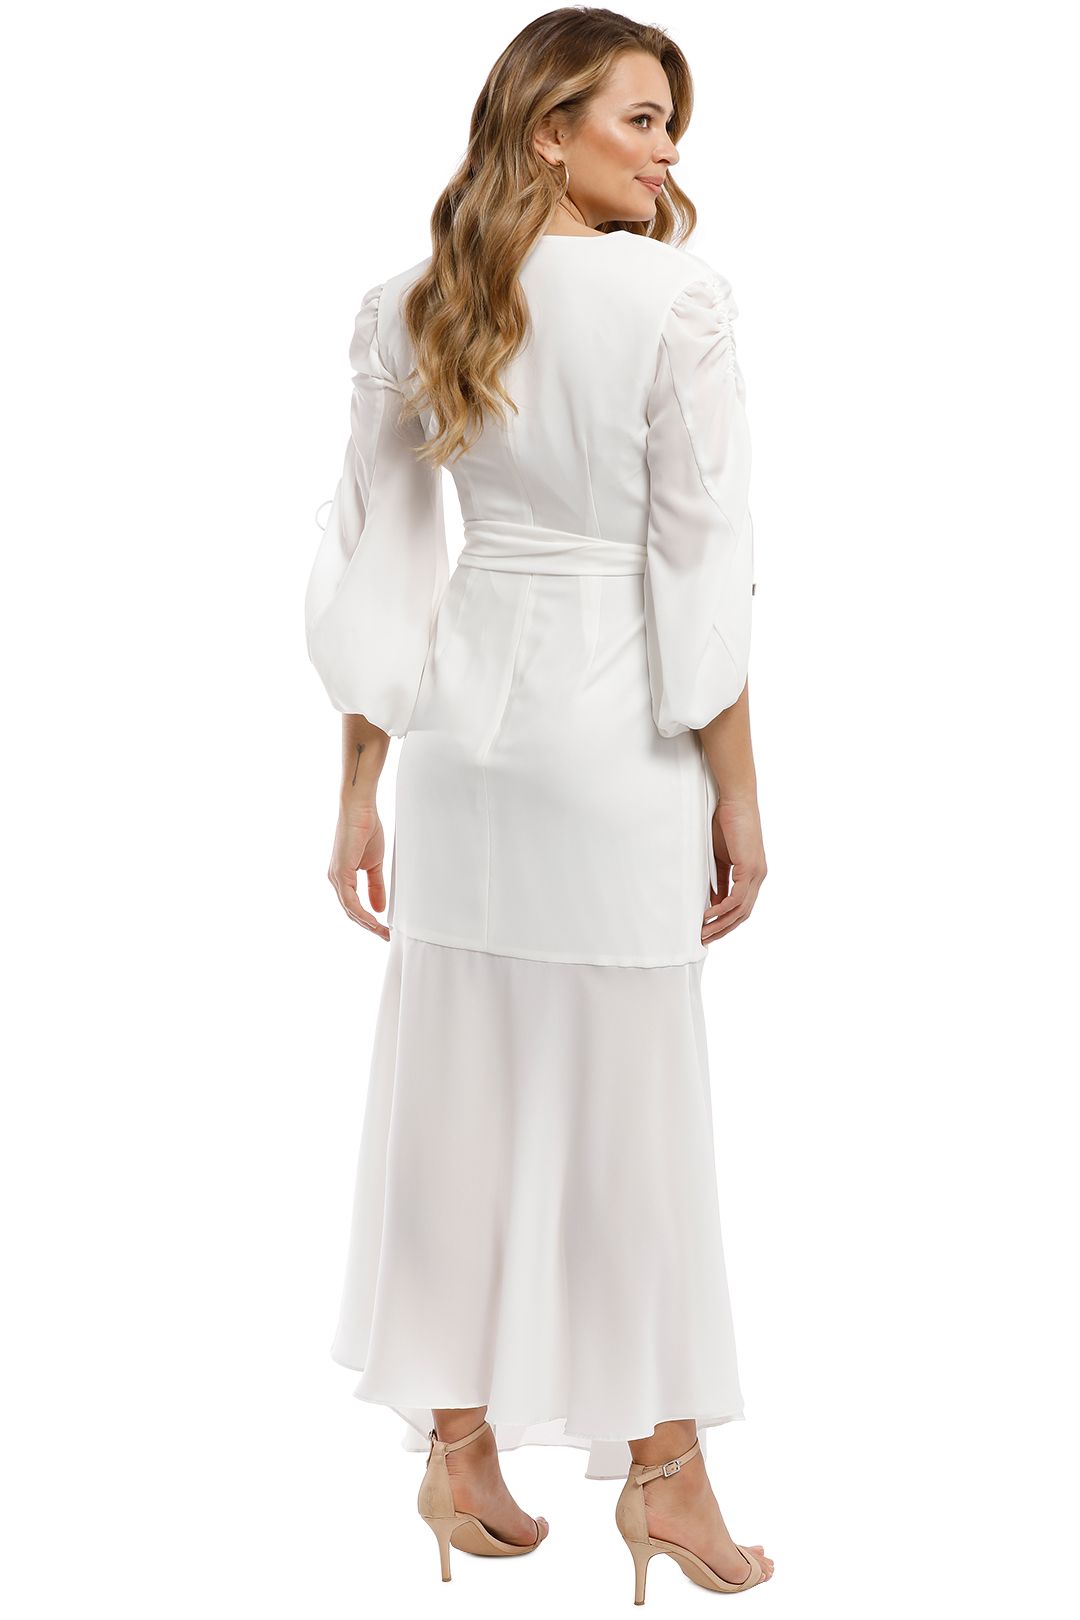 CMEO Collective - Favours Gown - Ivory - Back